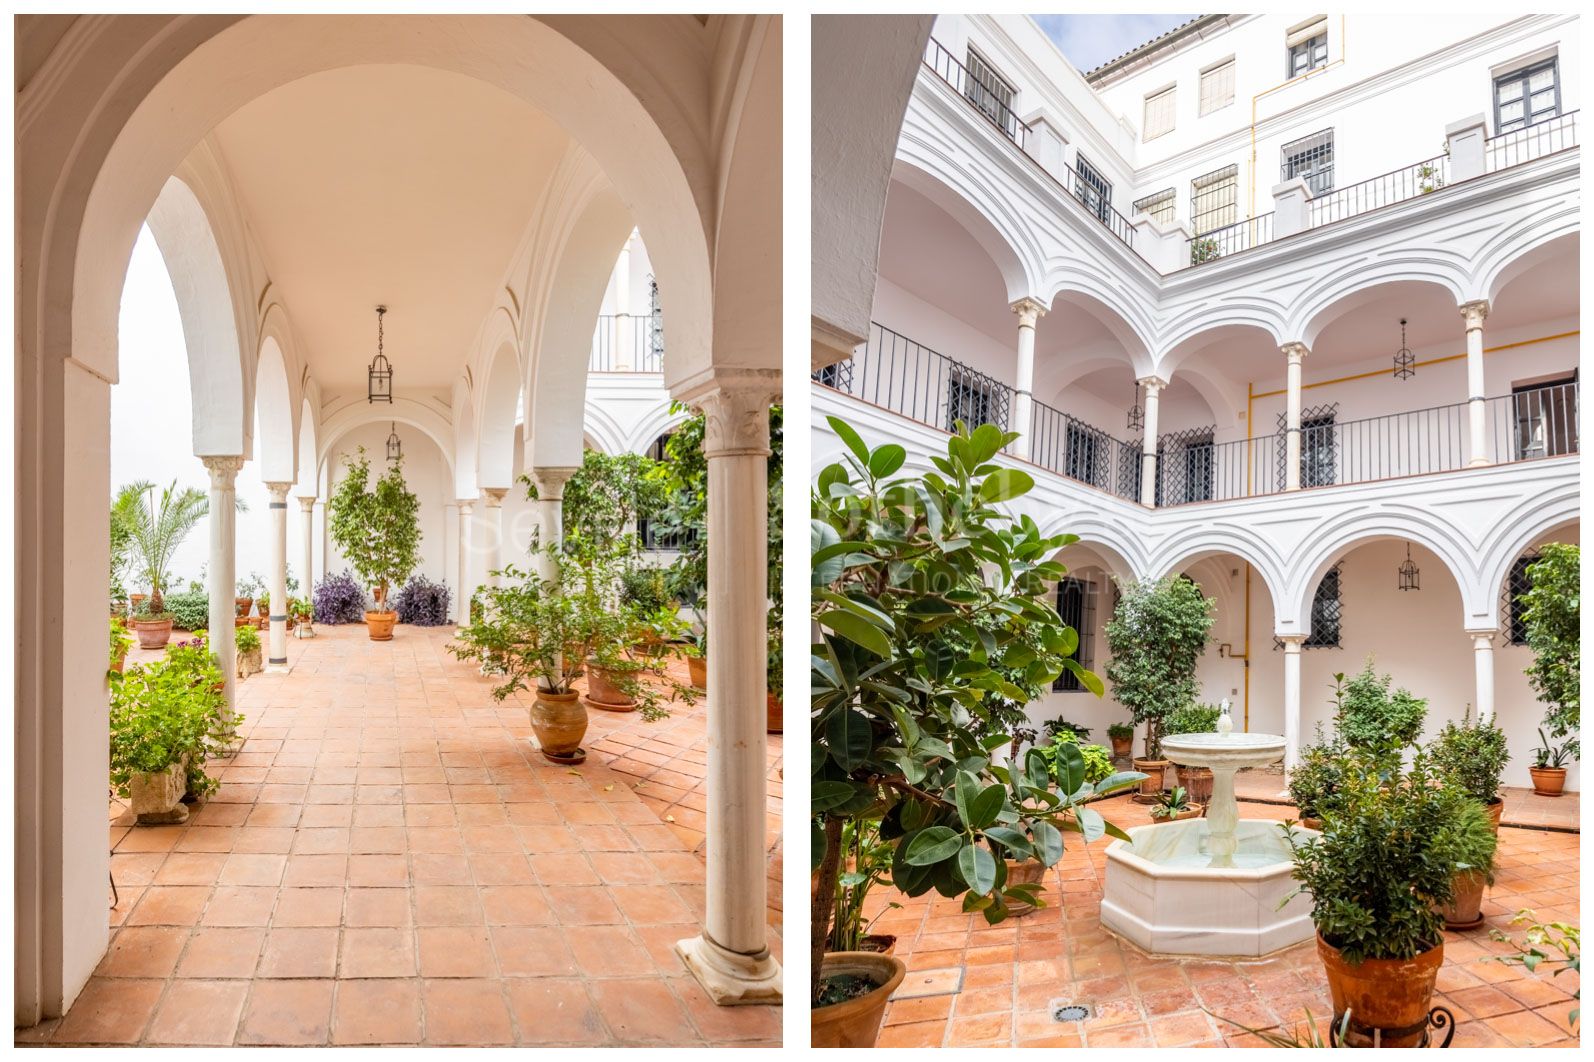 Elegant apartment in one of the most emblematic streets of Seville.